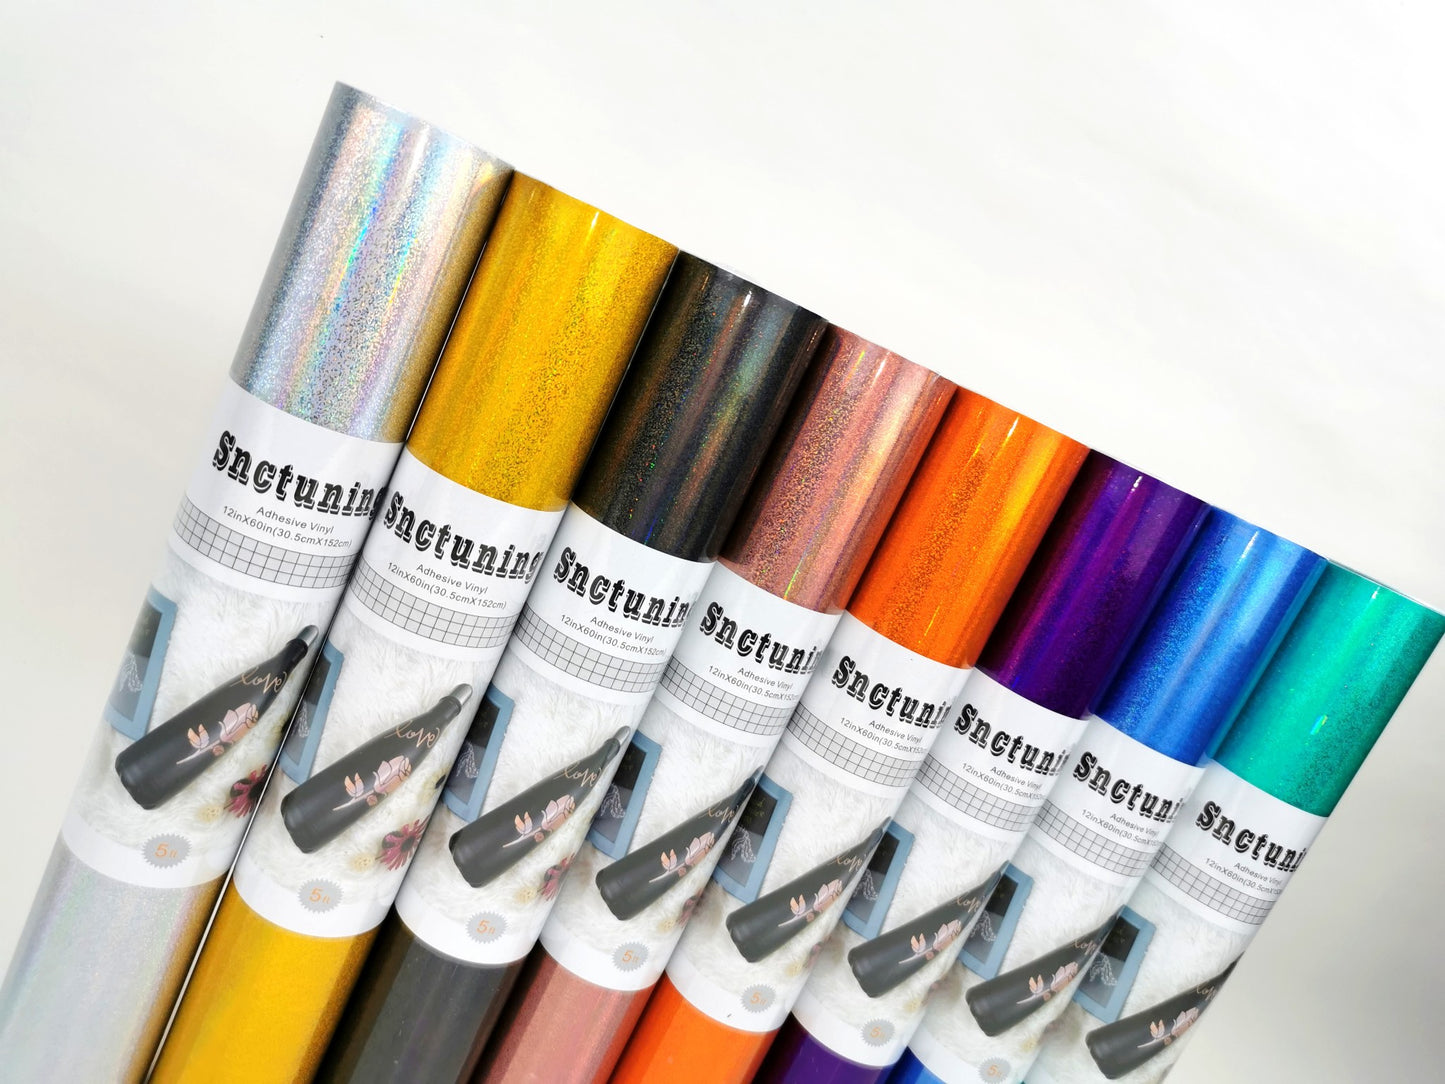 SNC 1ftx5ft Quality Vinyl Sticker Adhesive Roll Holographic Shimmer CHOOSE COLOR